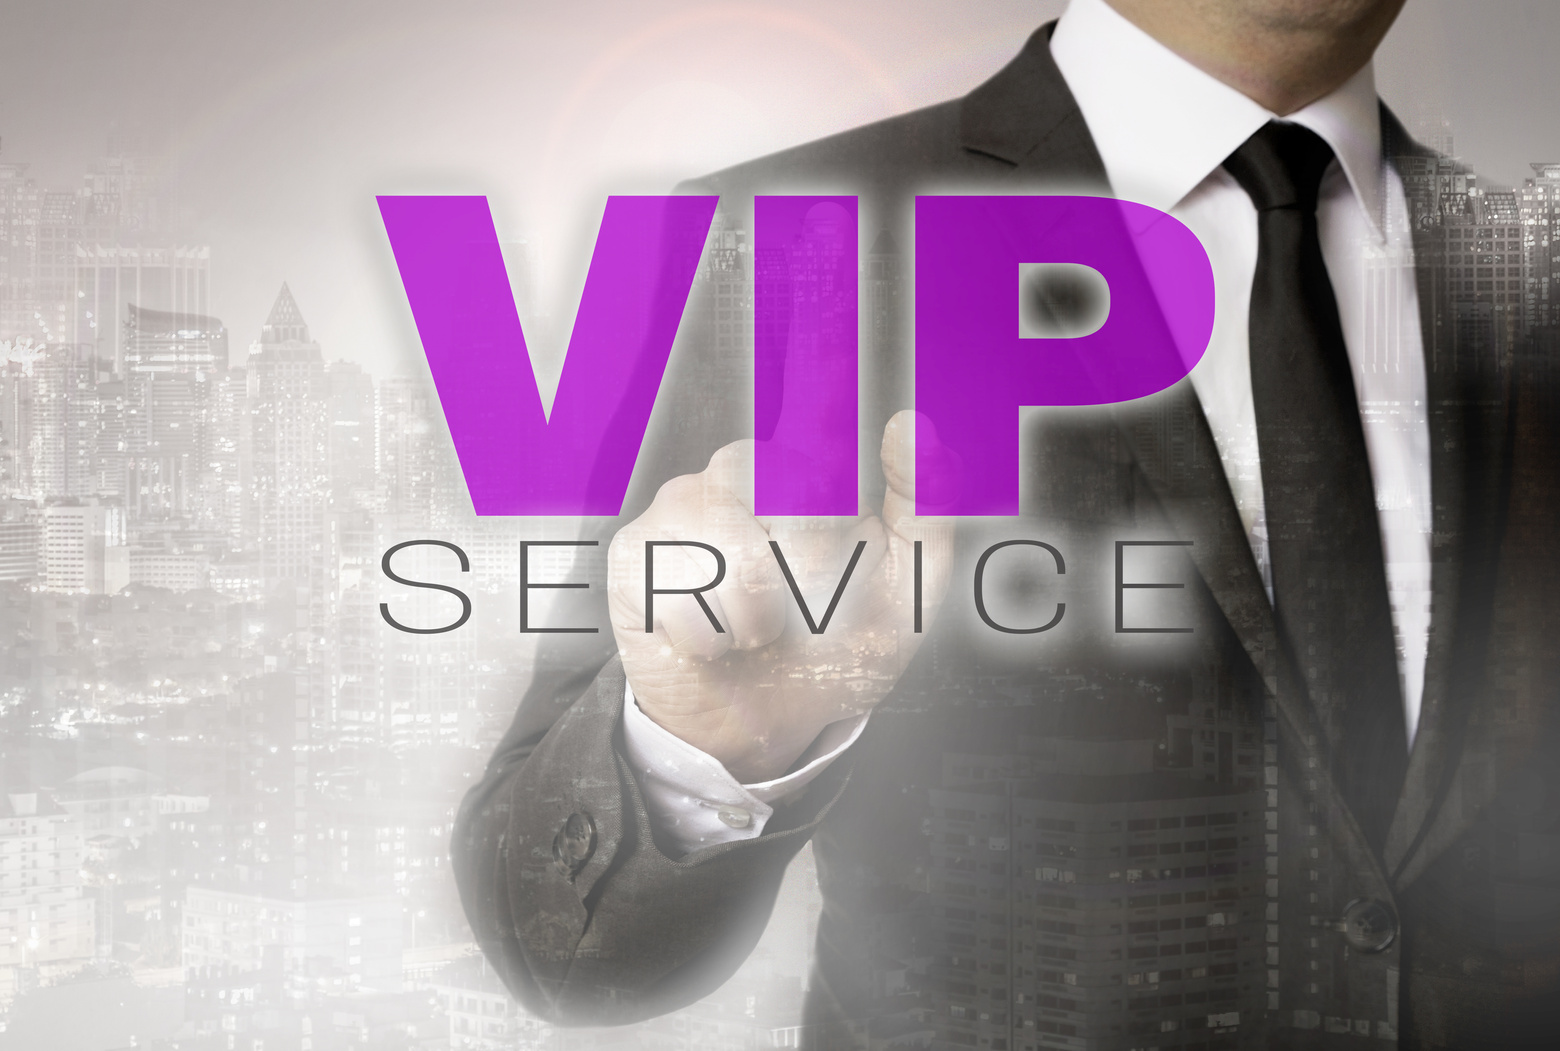 Vip service is shown by businessman concept